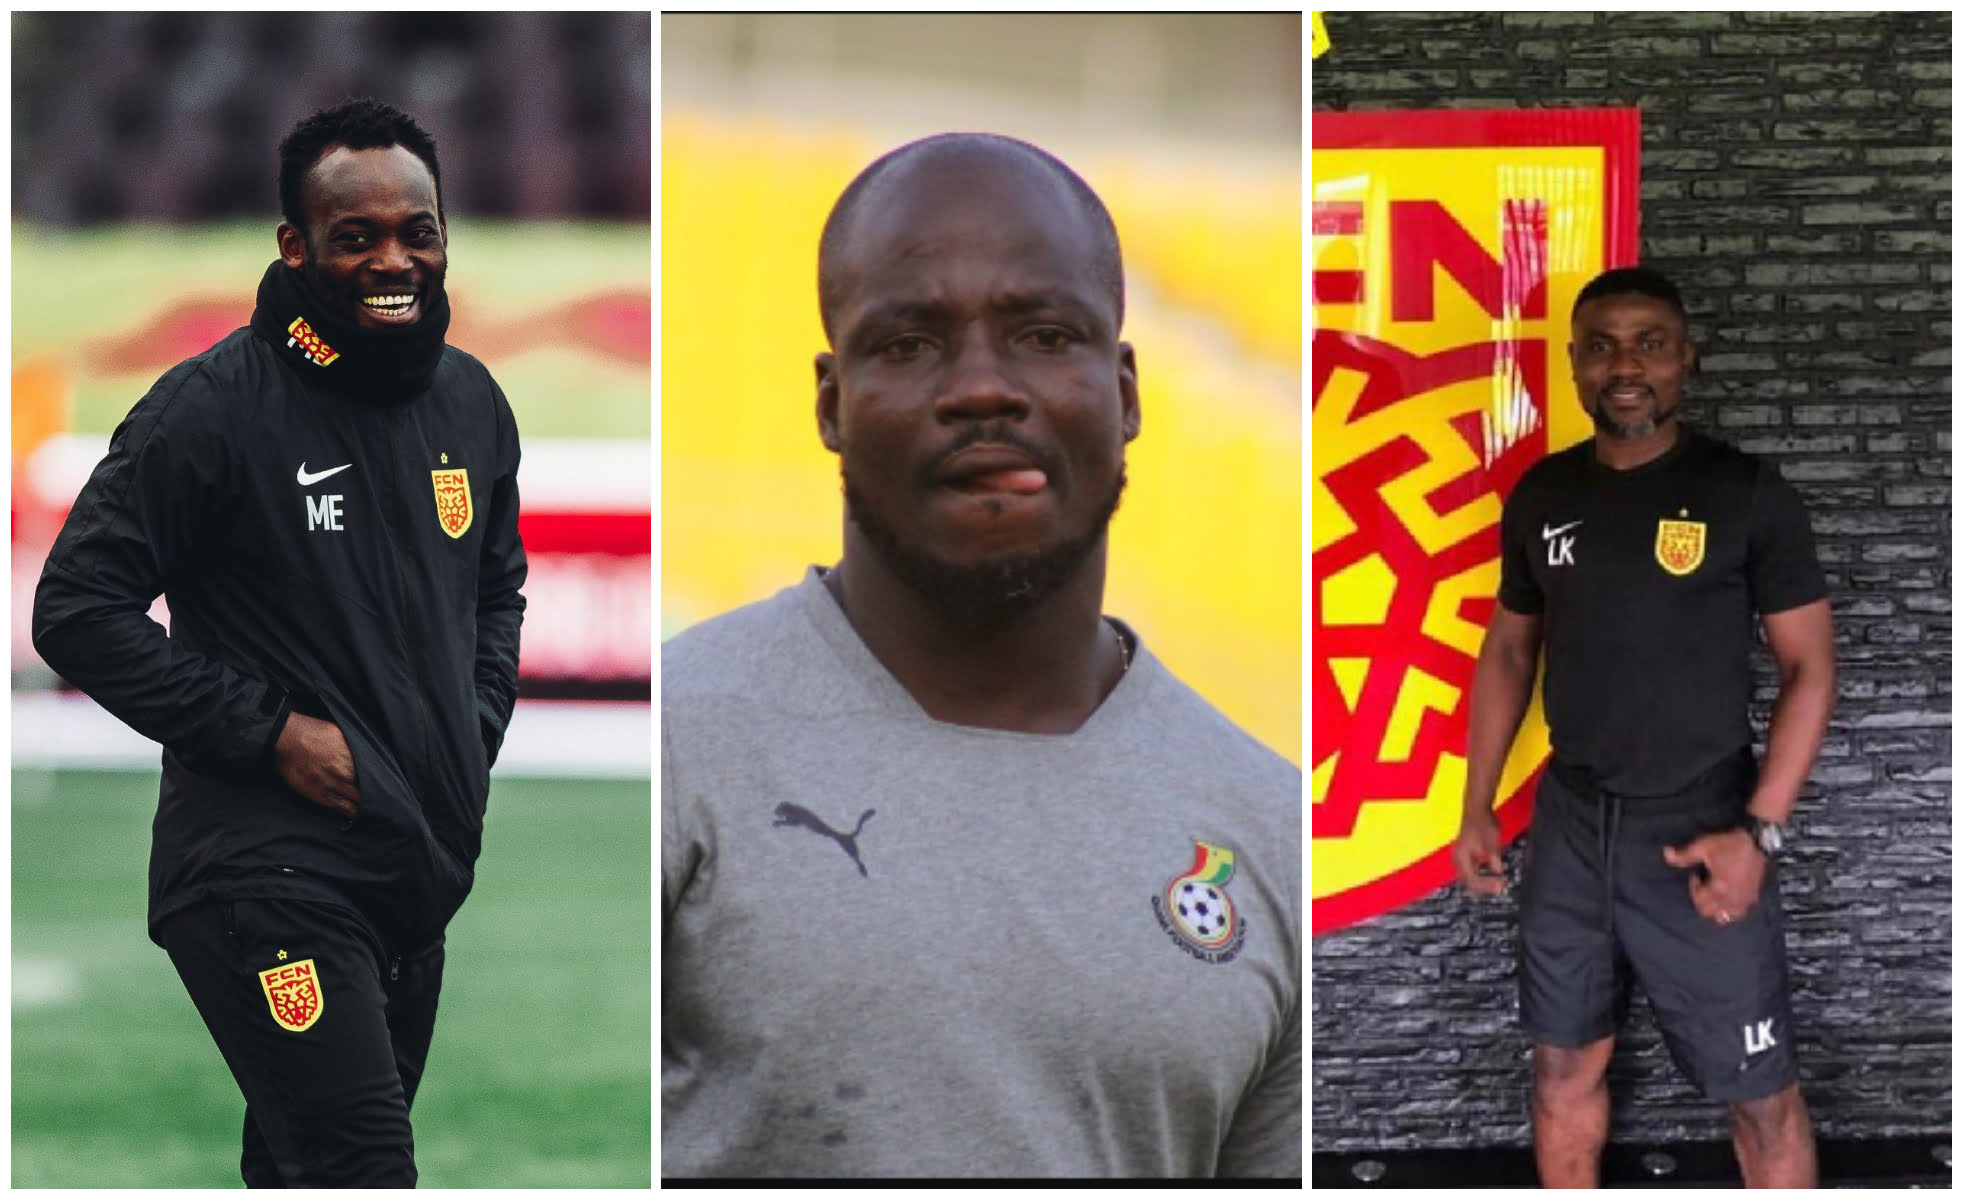 The Black Stars coaching job should be given to ex-players like Essien, Laryea, Appiah – Charles Taylor